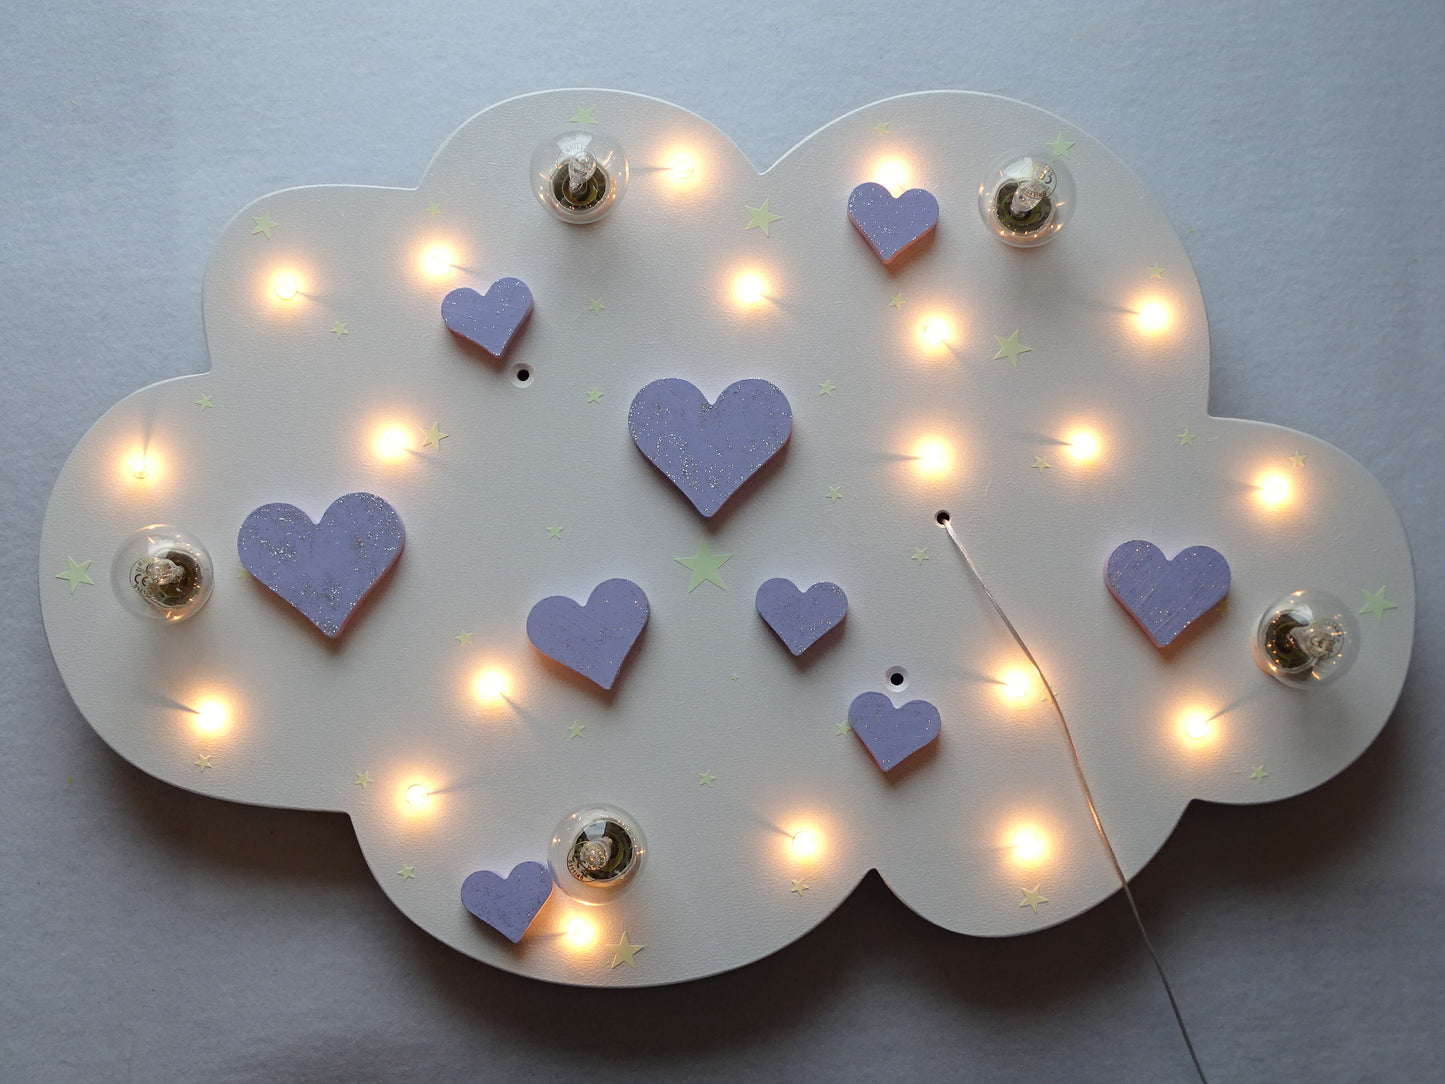 LED ceiling light "HEARTS" - with GLITTER!